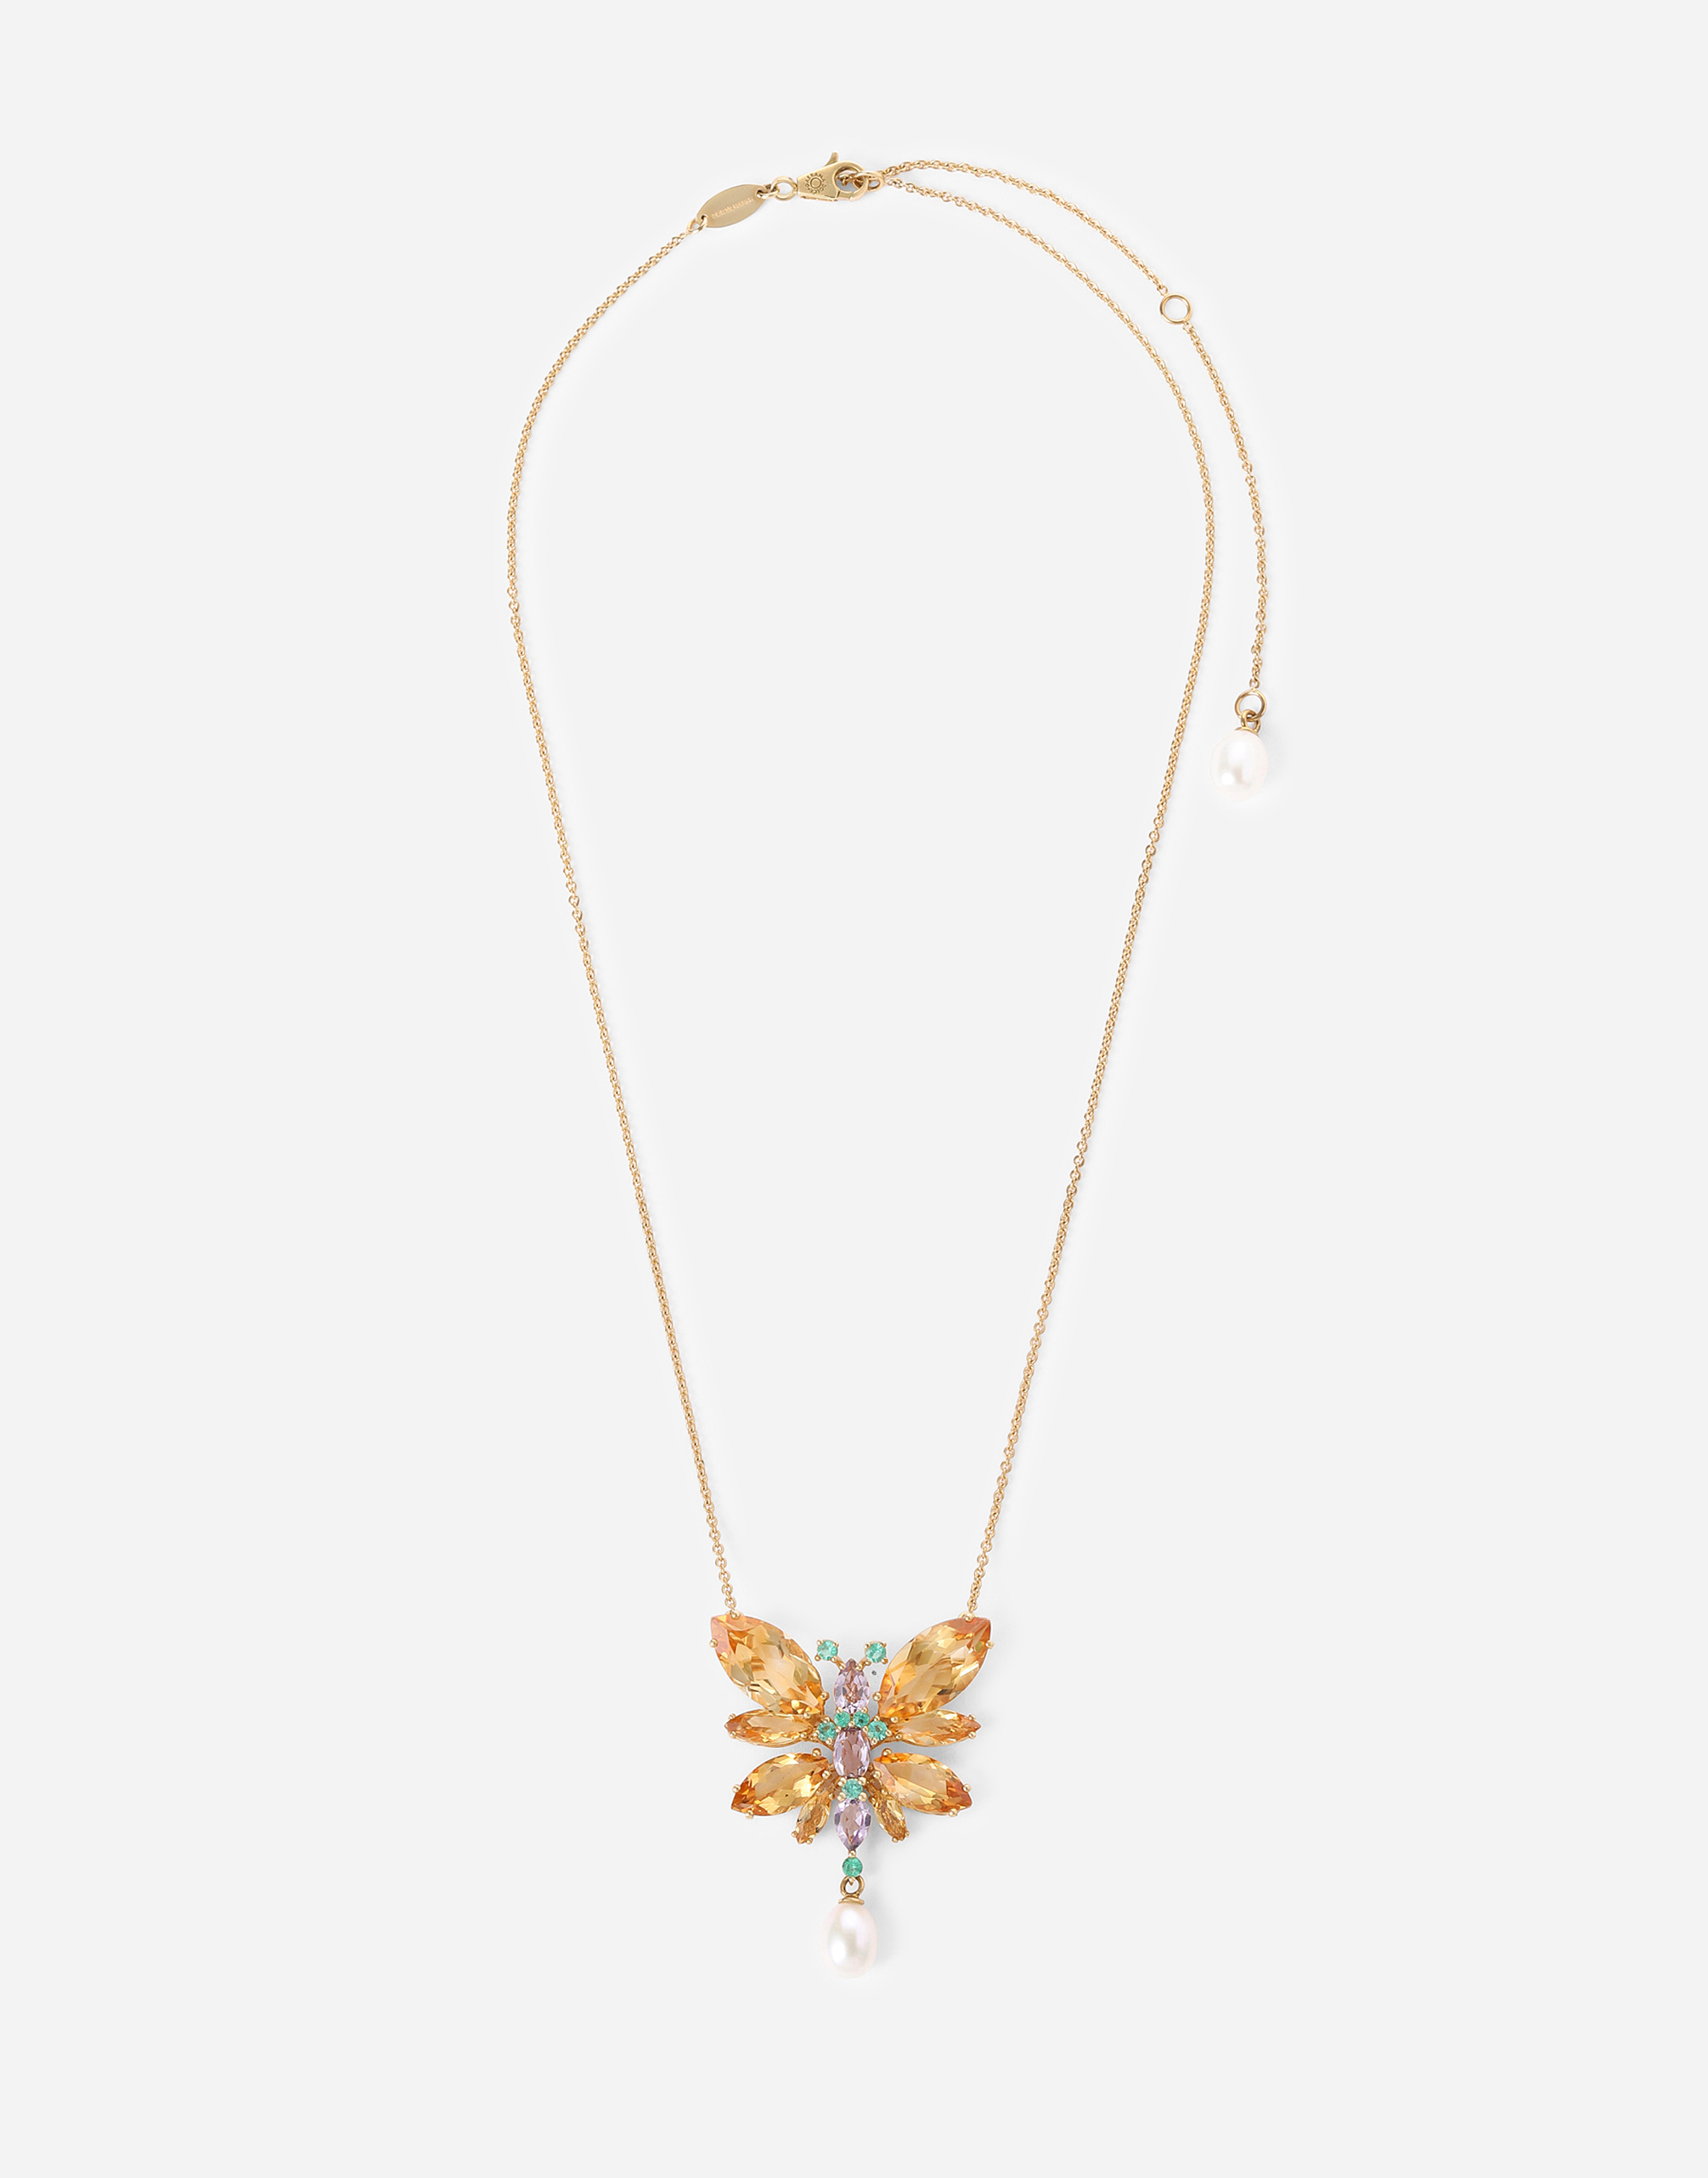 Spring necklace in yellow 18kt gold with citrine butterfly in Gold